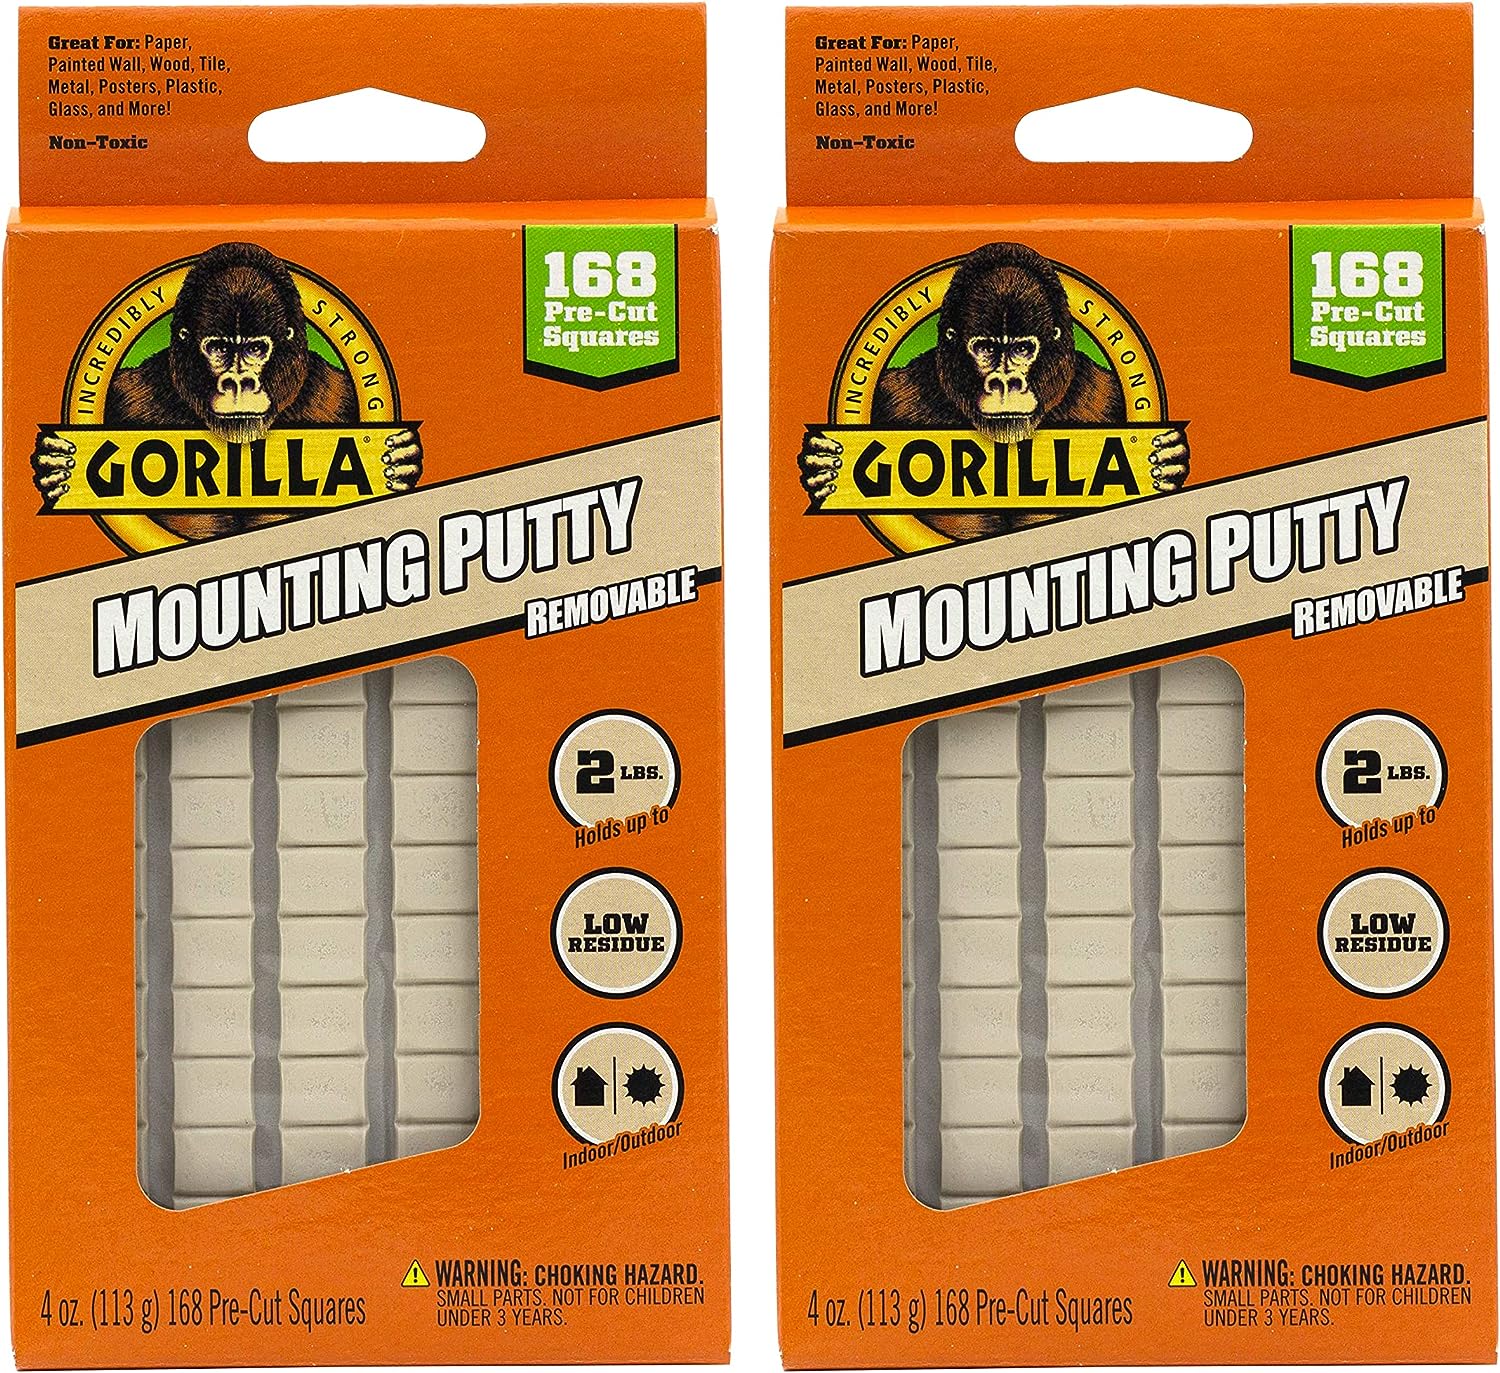 Gorilla Removable Mounting Putty, 168 Pre-Cut Squares, [...]